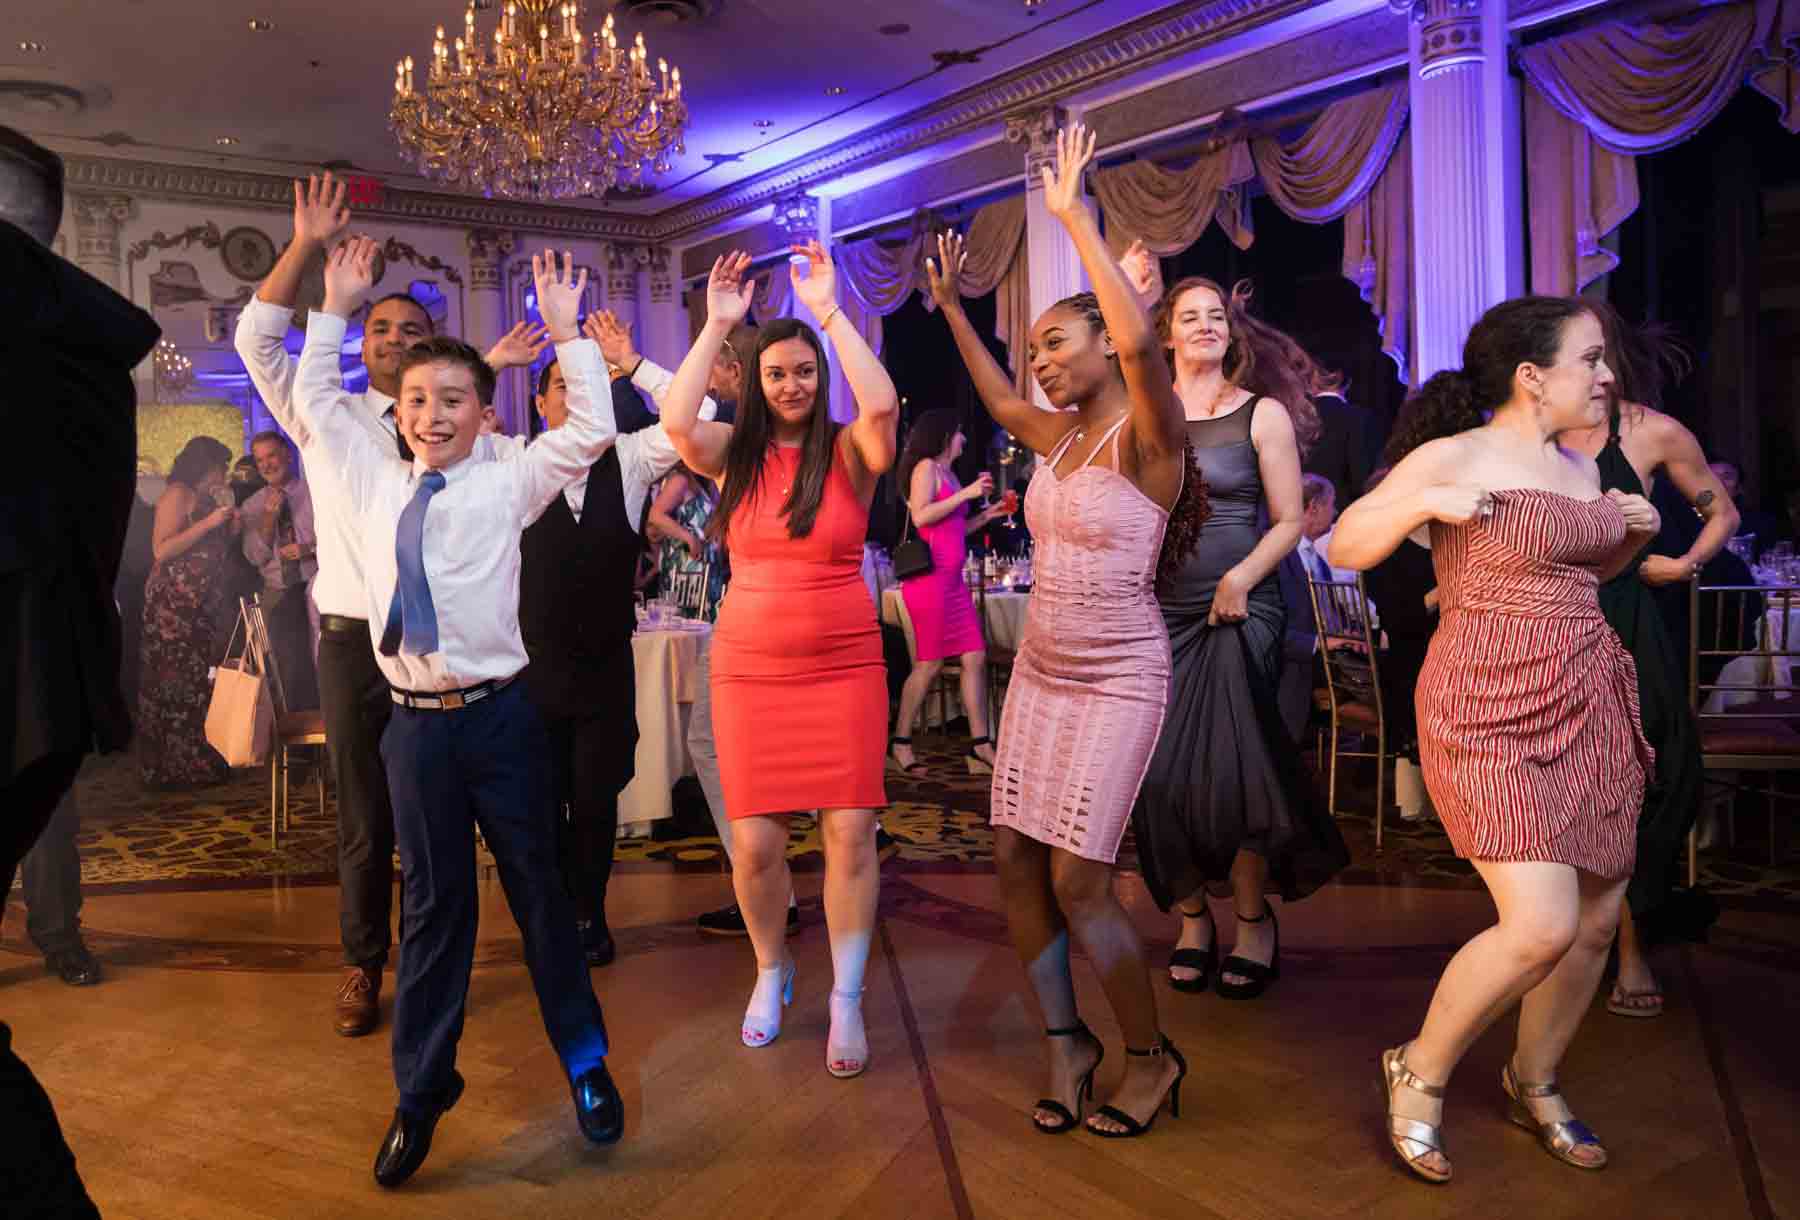 Guests dancing with arms raised at a Terrace on the Park wedding